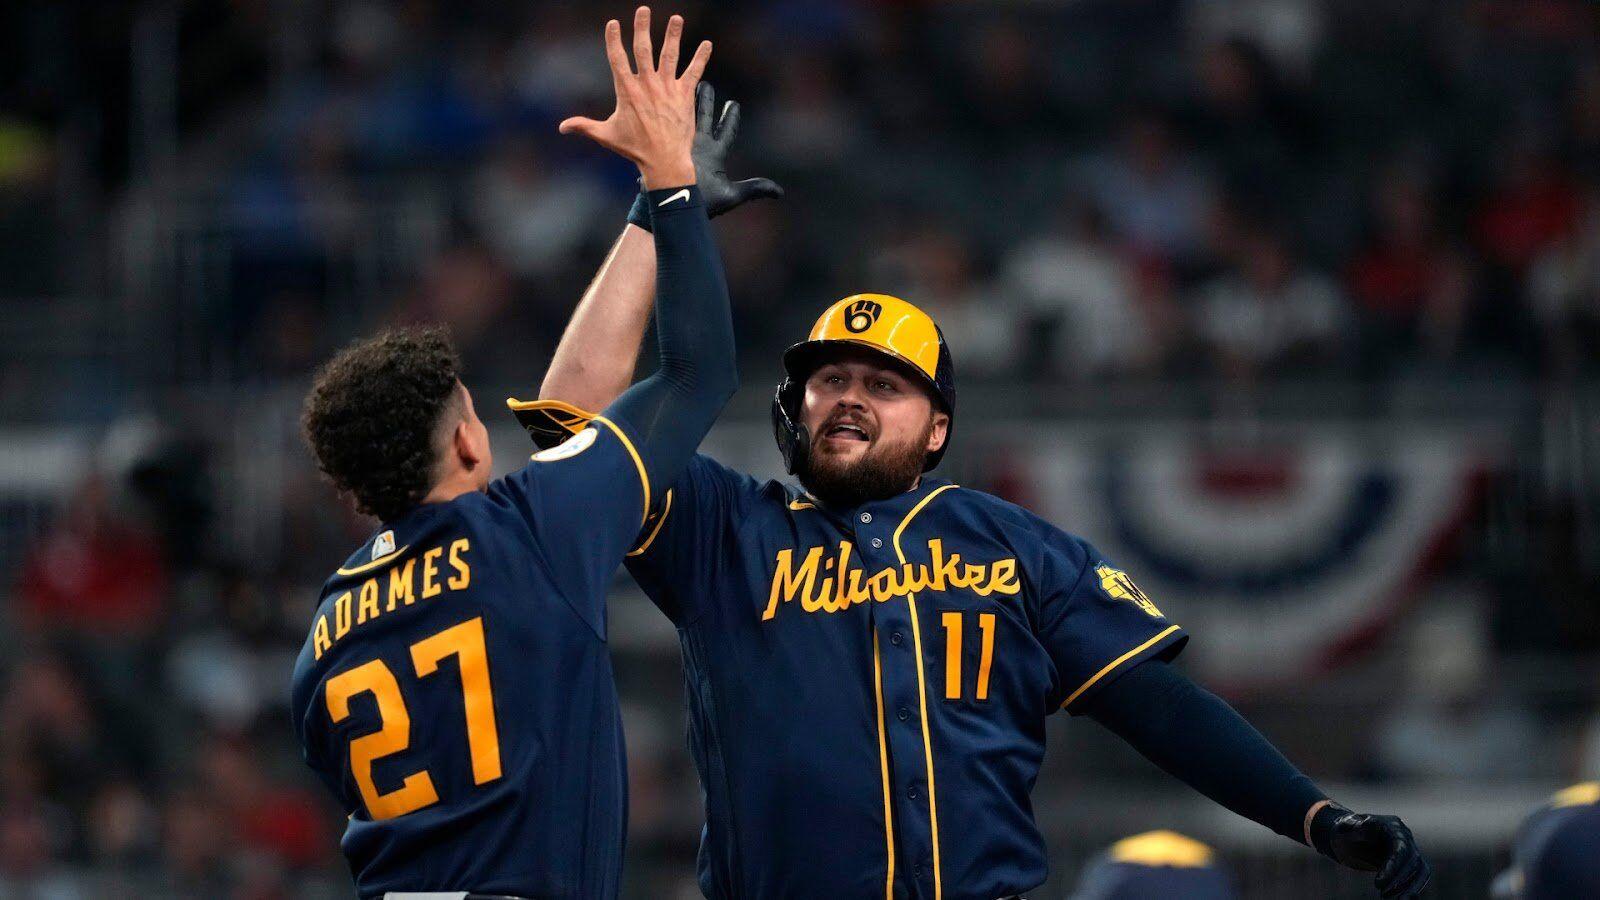 Brewers drop another game to Rockies, 12-8 - Brew Crew Ball